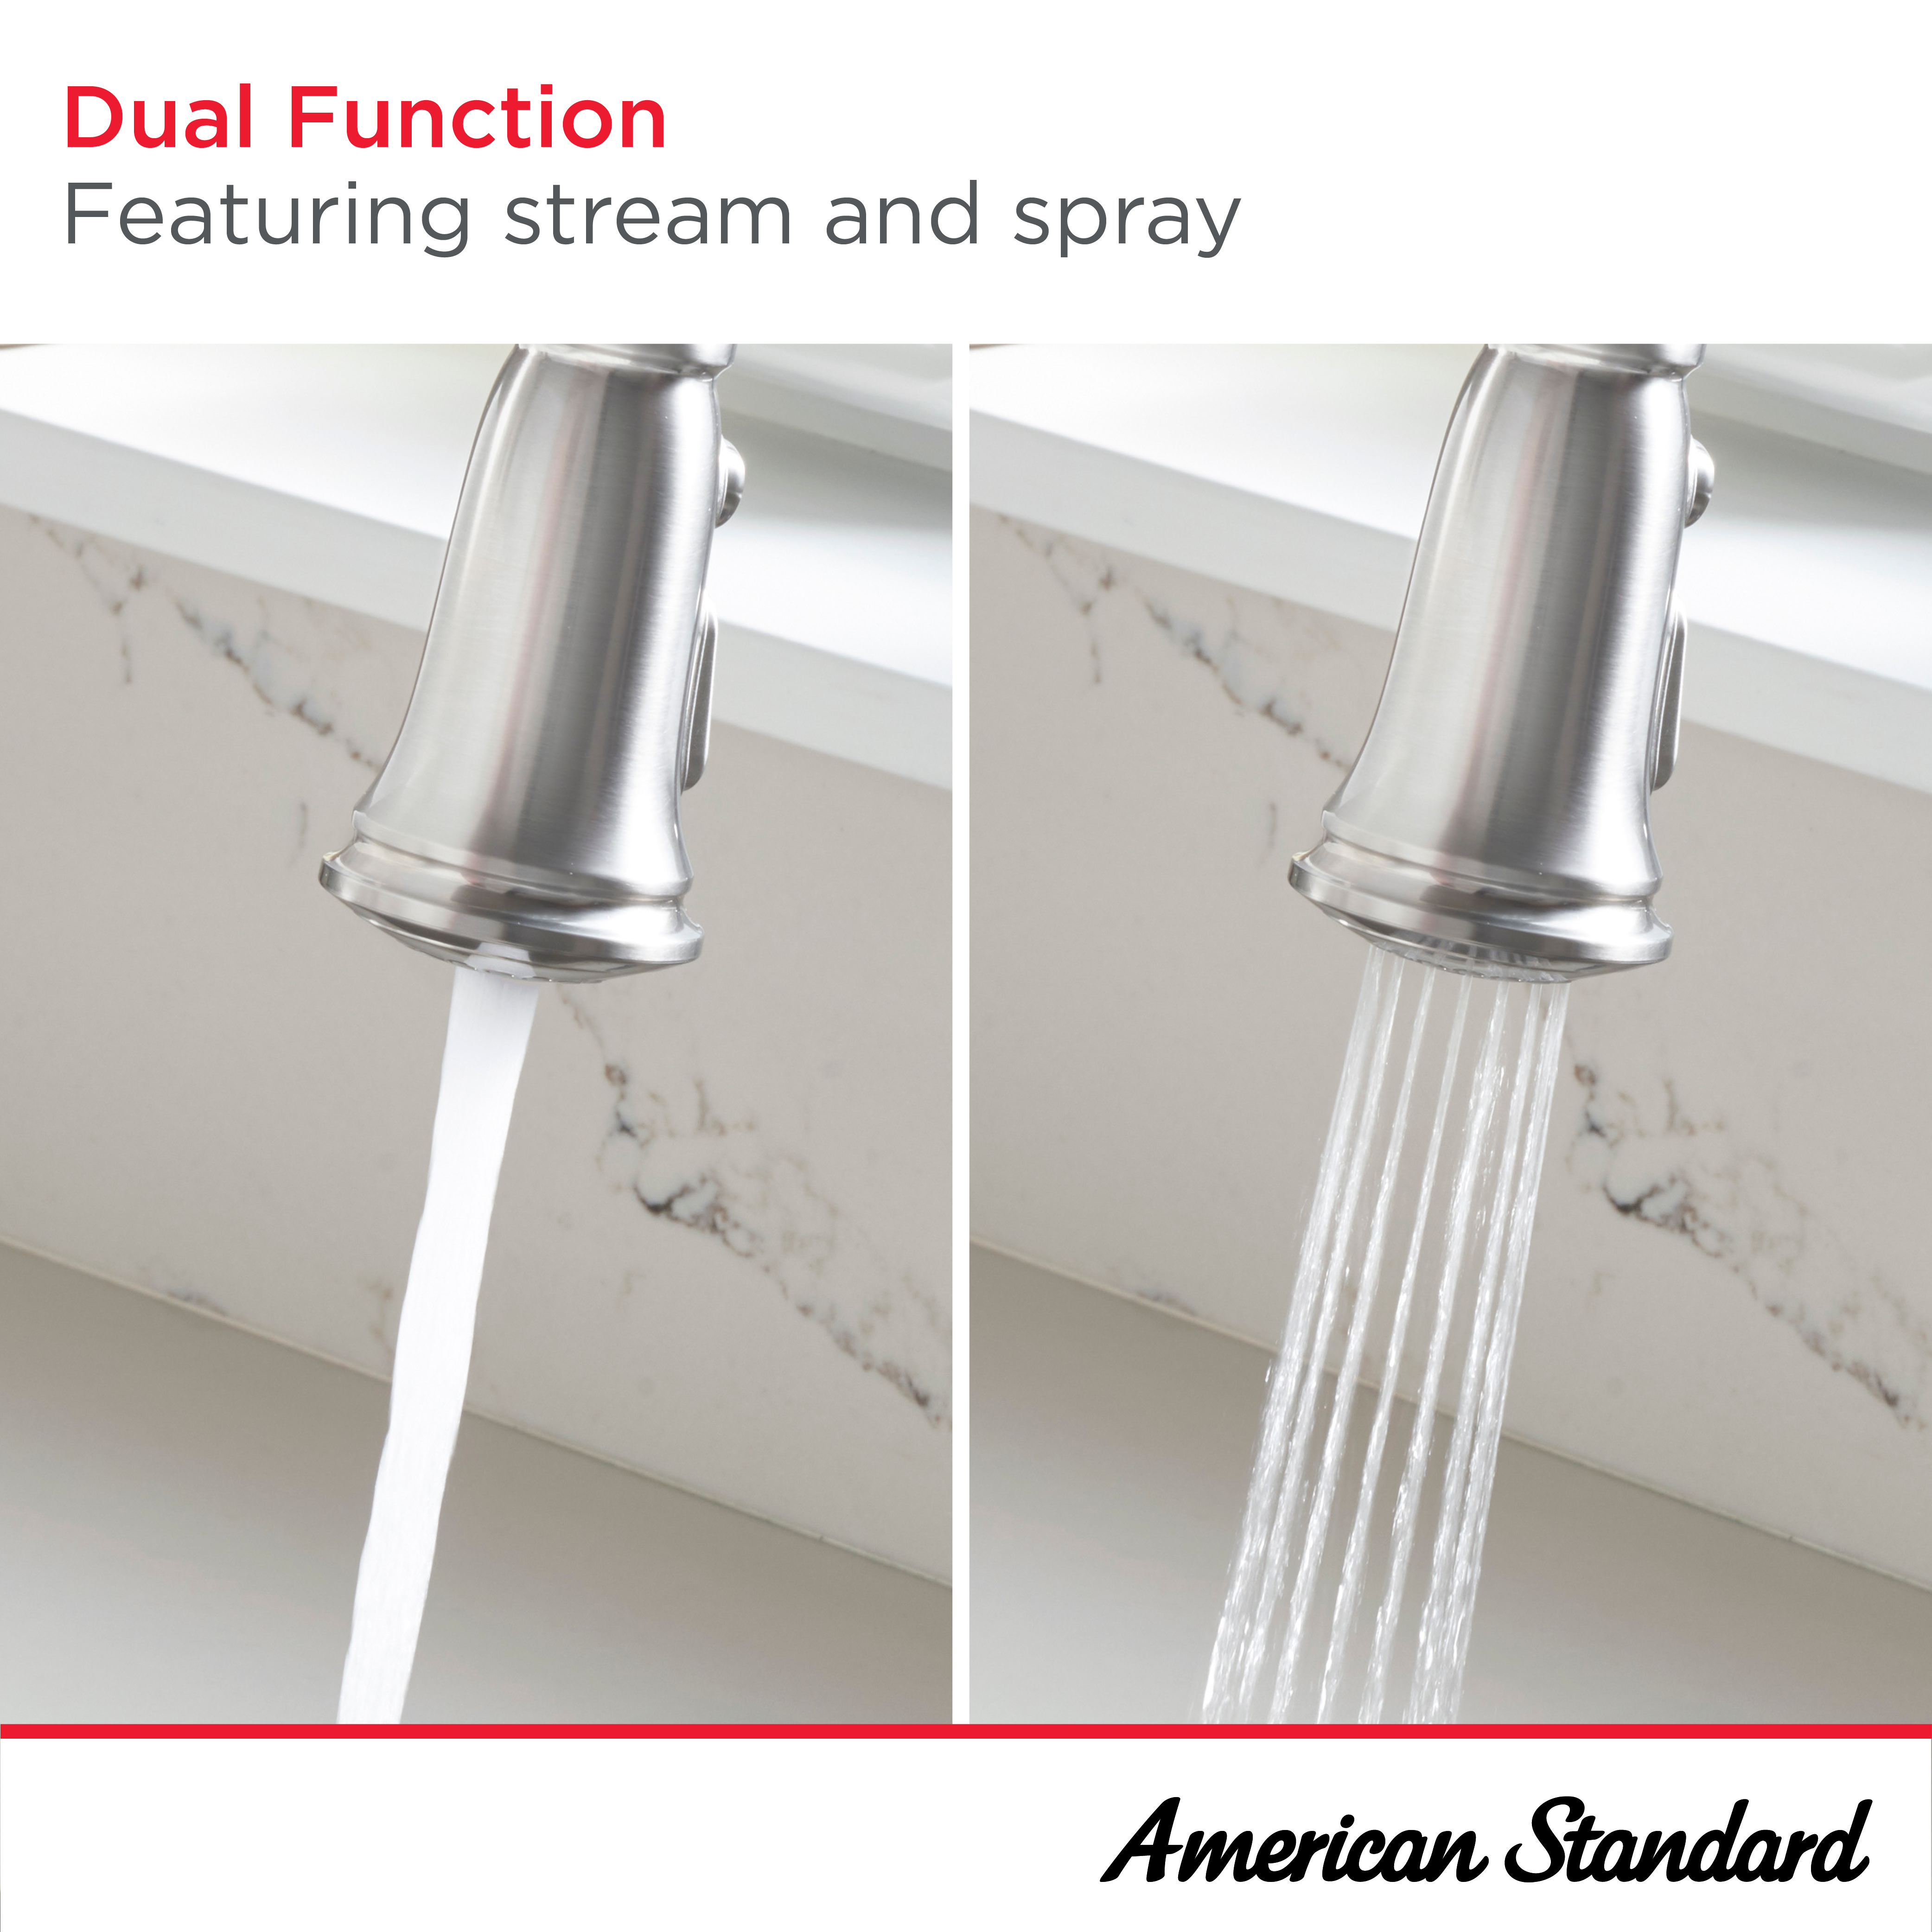 Delancey™ Single-Handle Pull-Down Dual Spray Function Kitchen Faucet 1.5 gpm/5.7 L/min